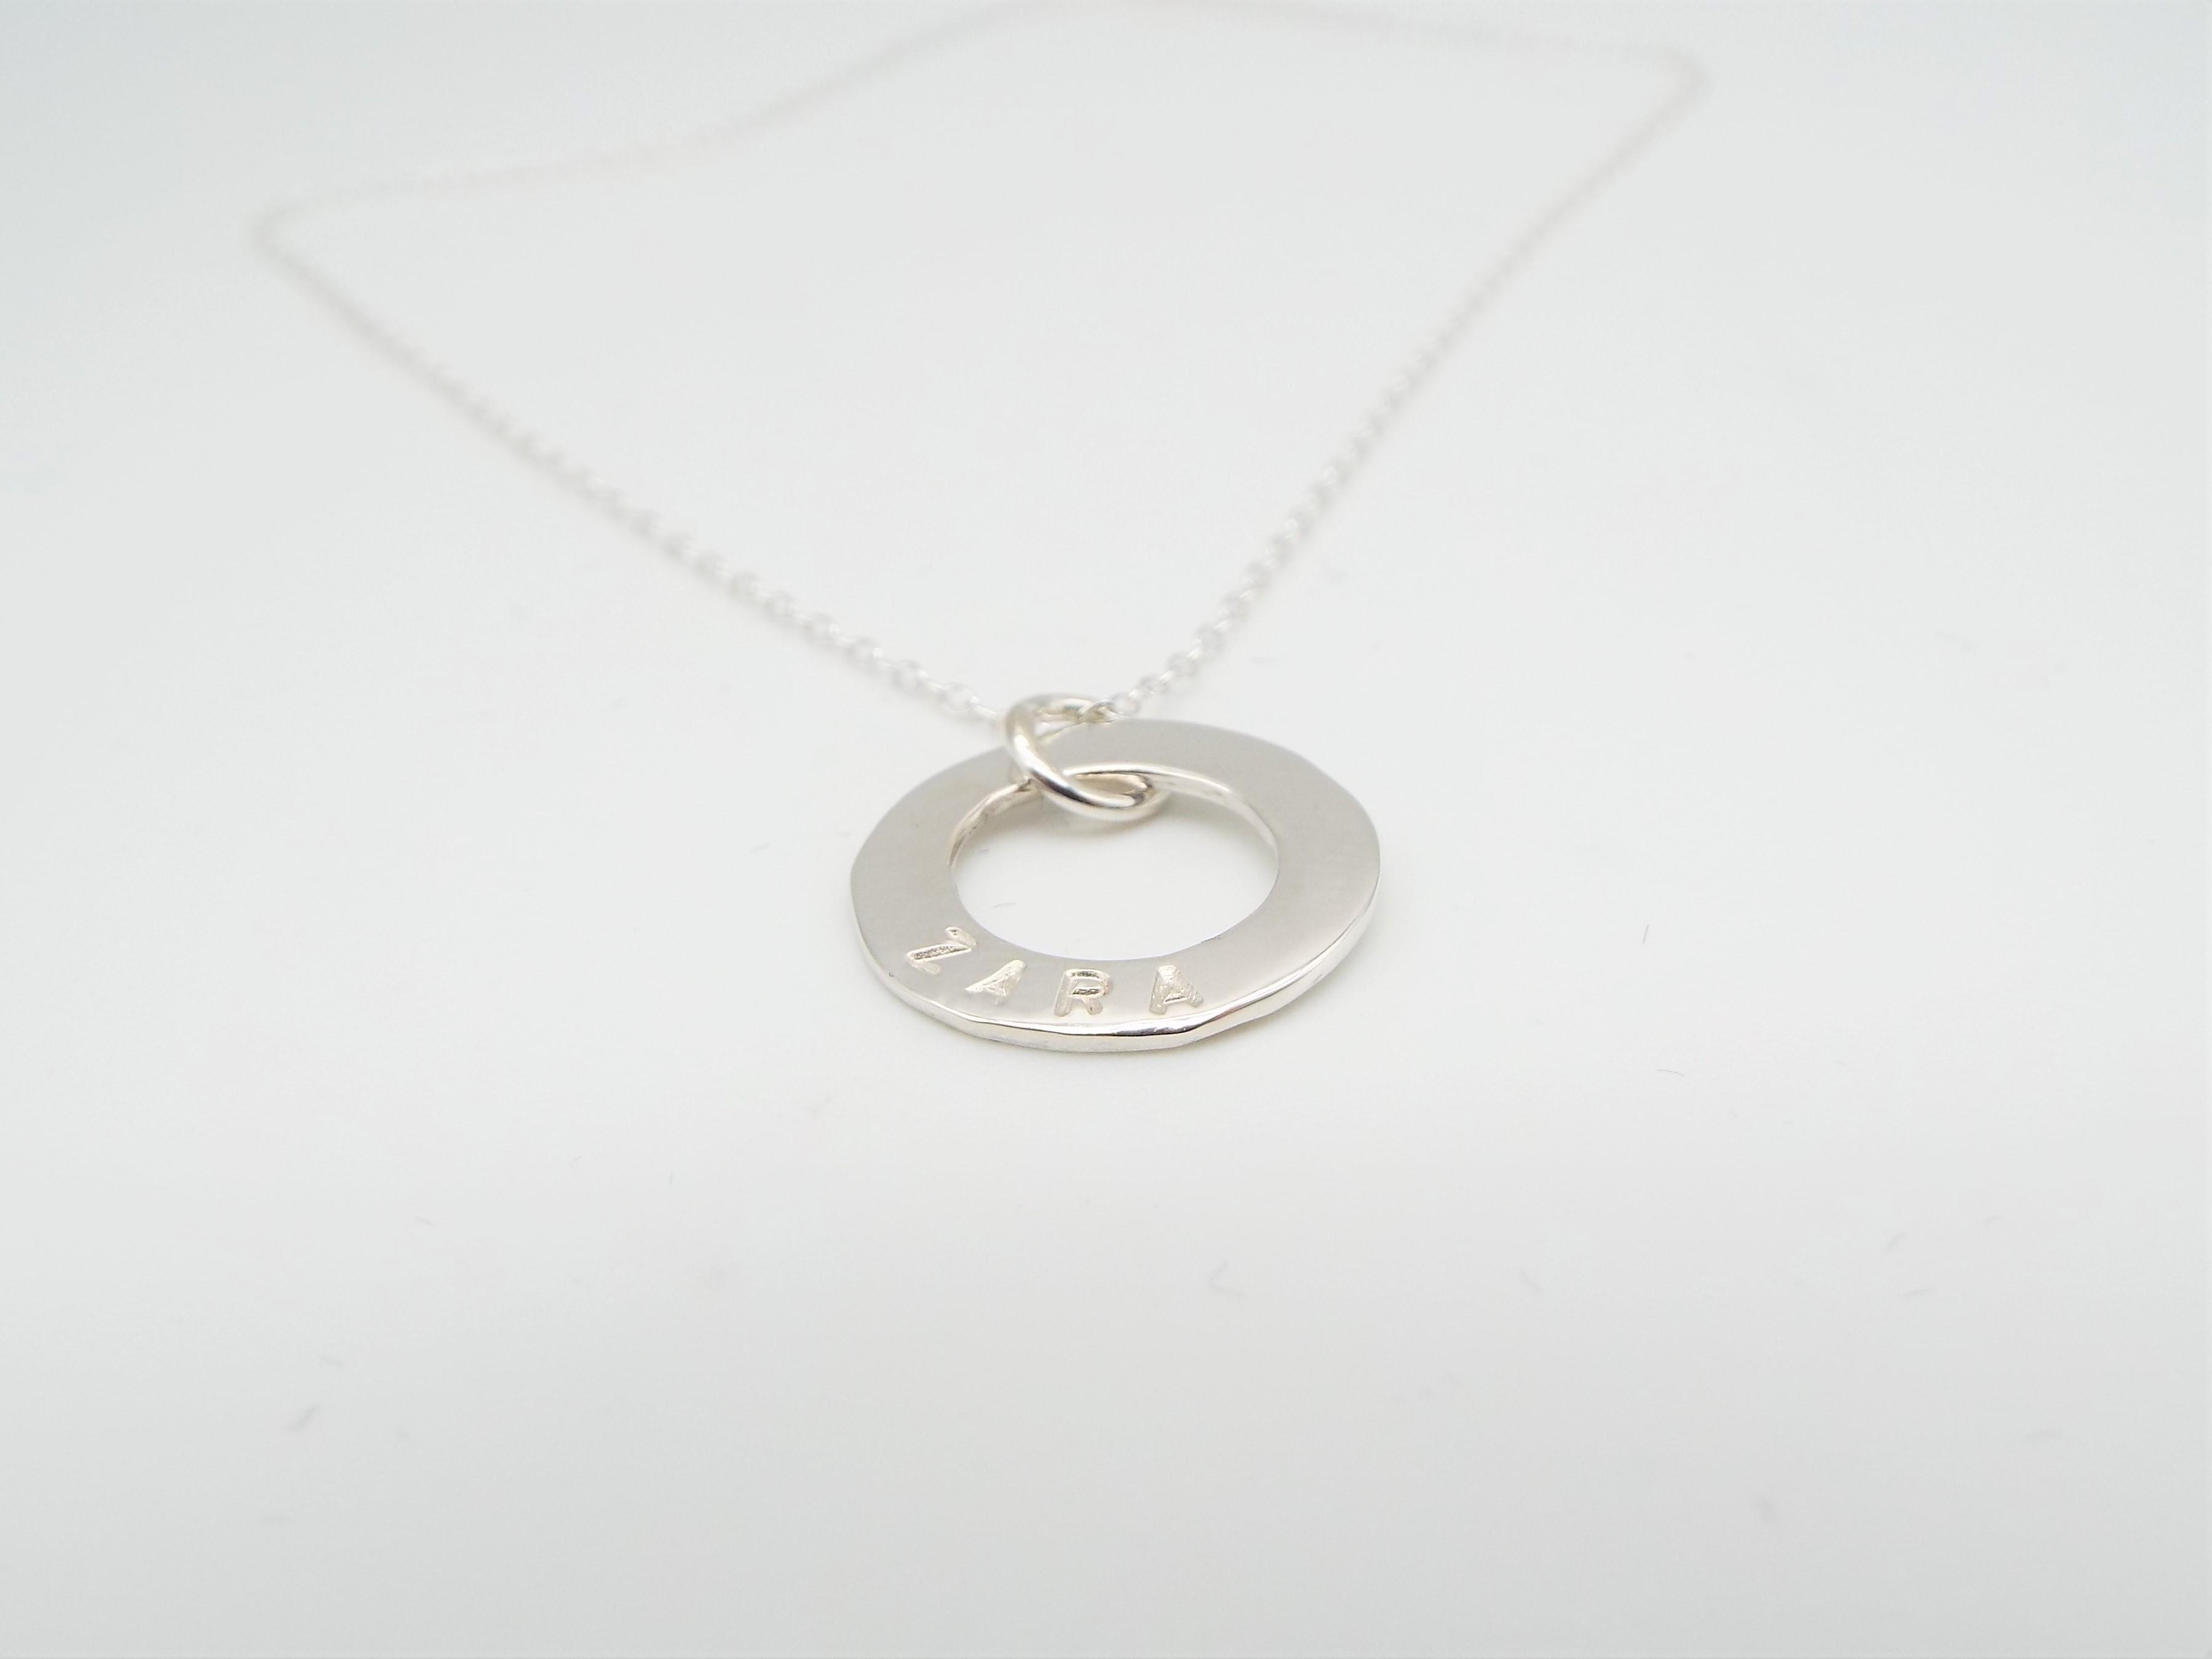 Sterling silver necklace personalised with name